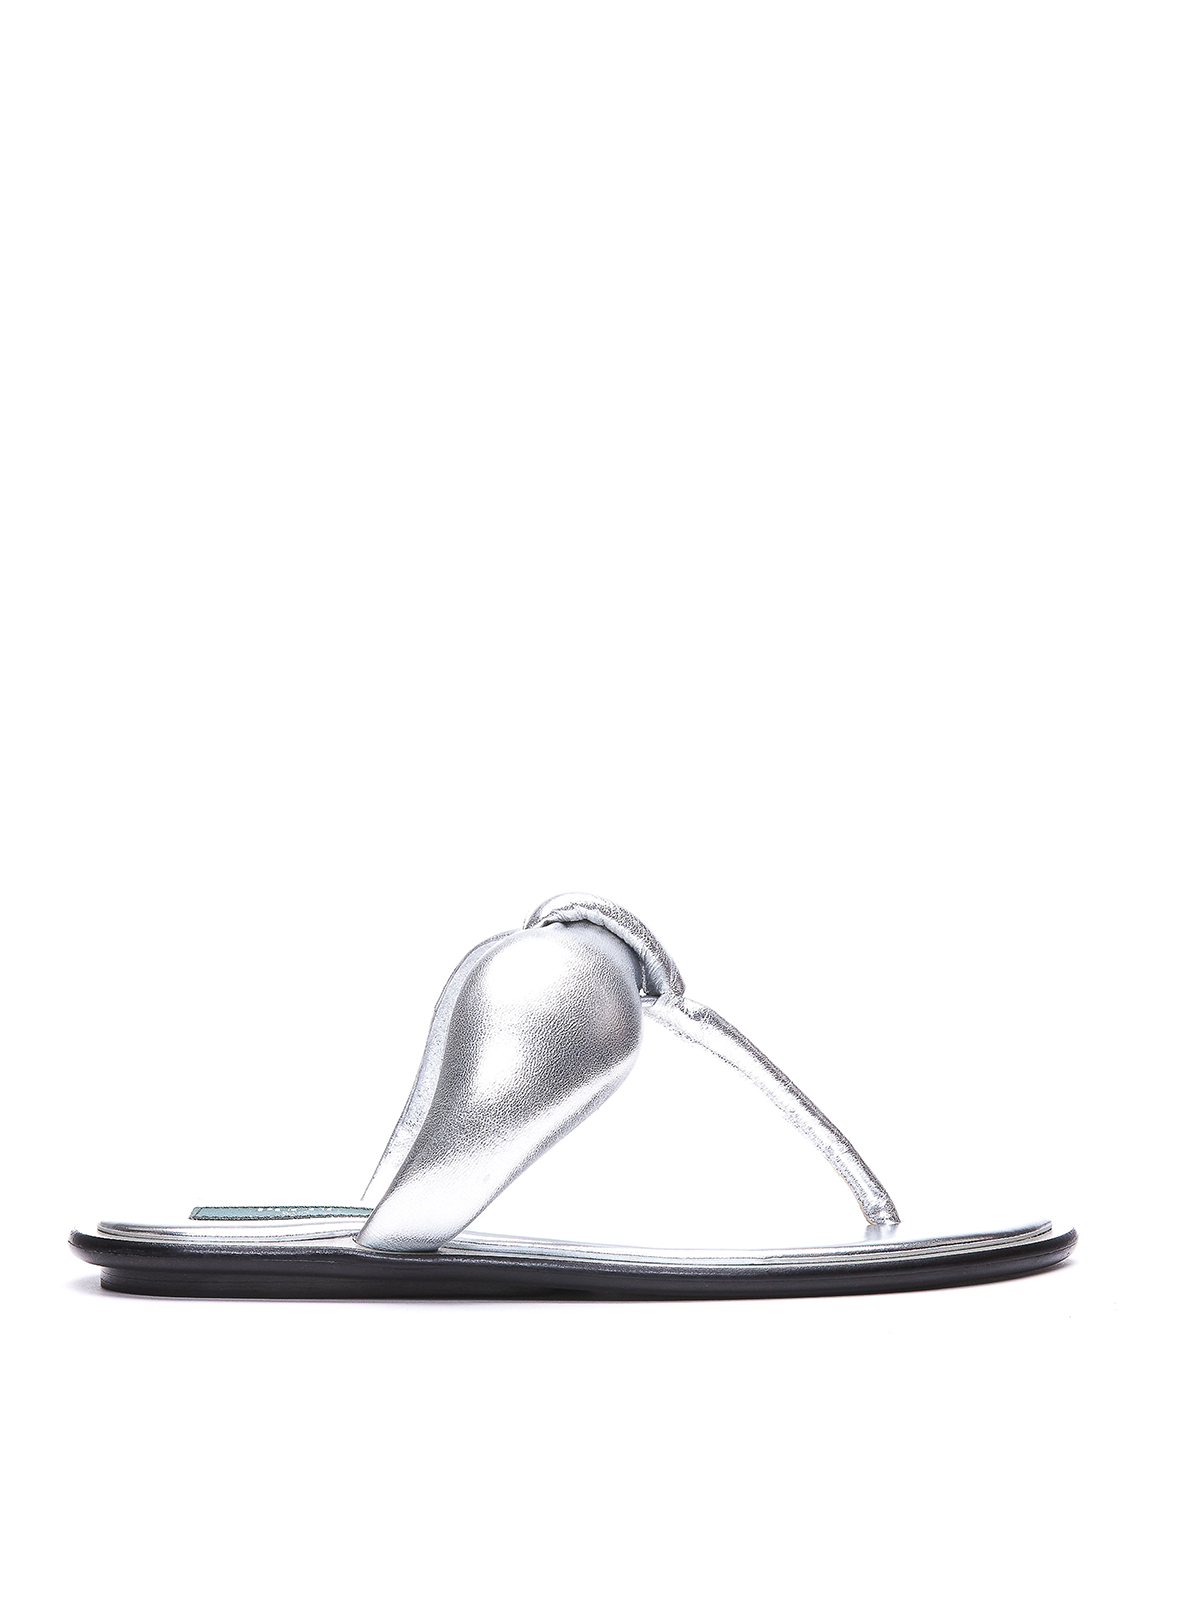 Emilio Pucci Silver Metallic Sandals With Padded Effect